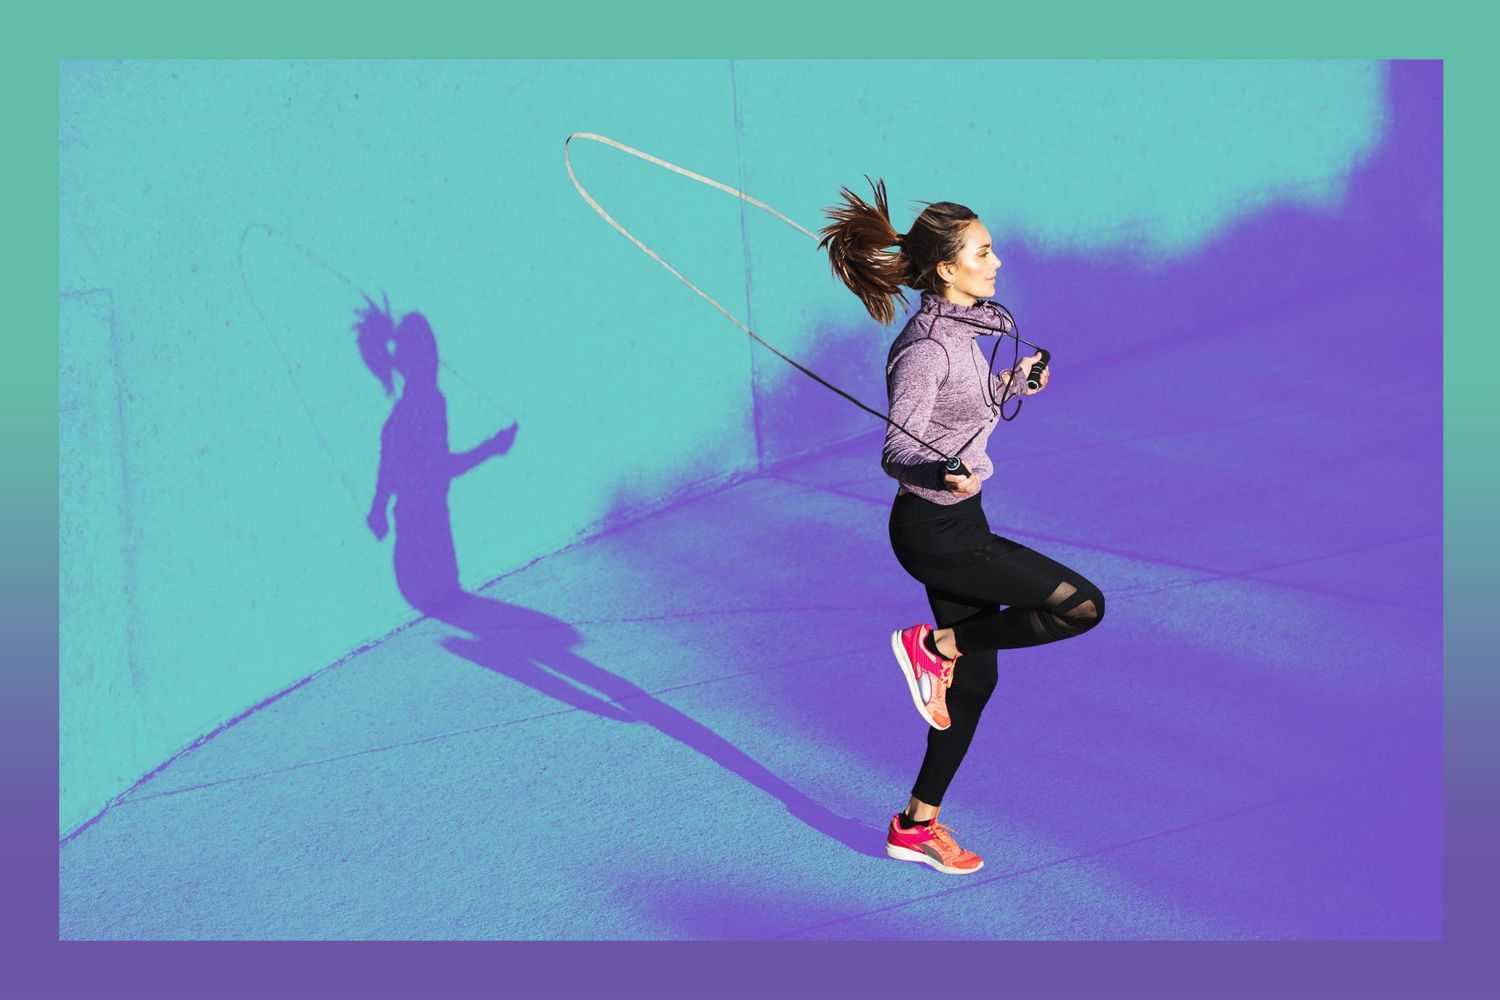 This-Jump-Rope-Workout-For-Beginners-Will-Leave-Your-Entire-Body-Burning-GettyImages-857902224